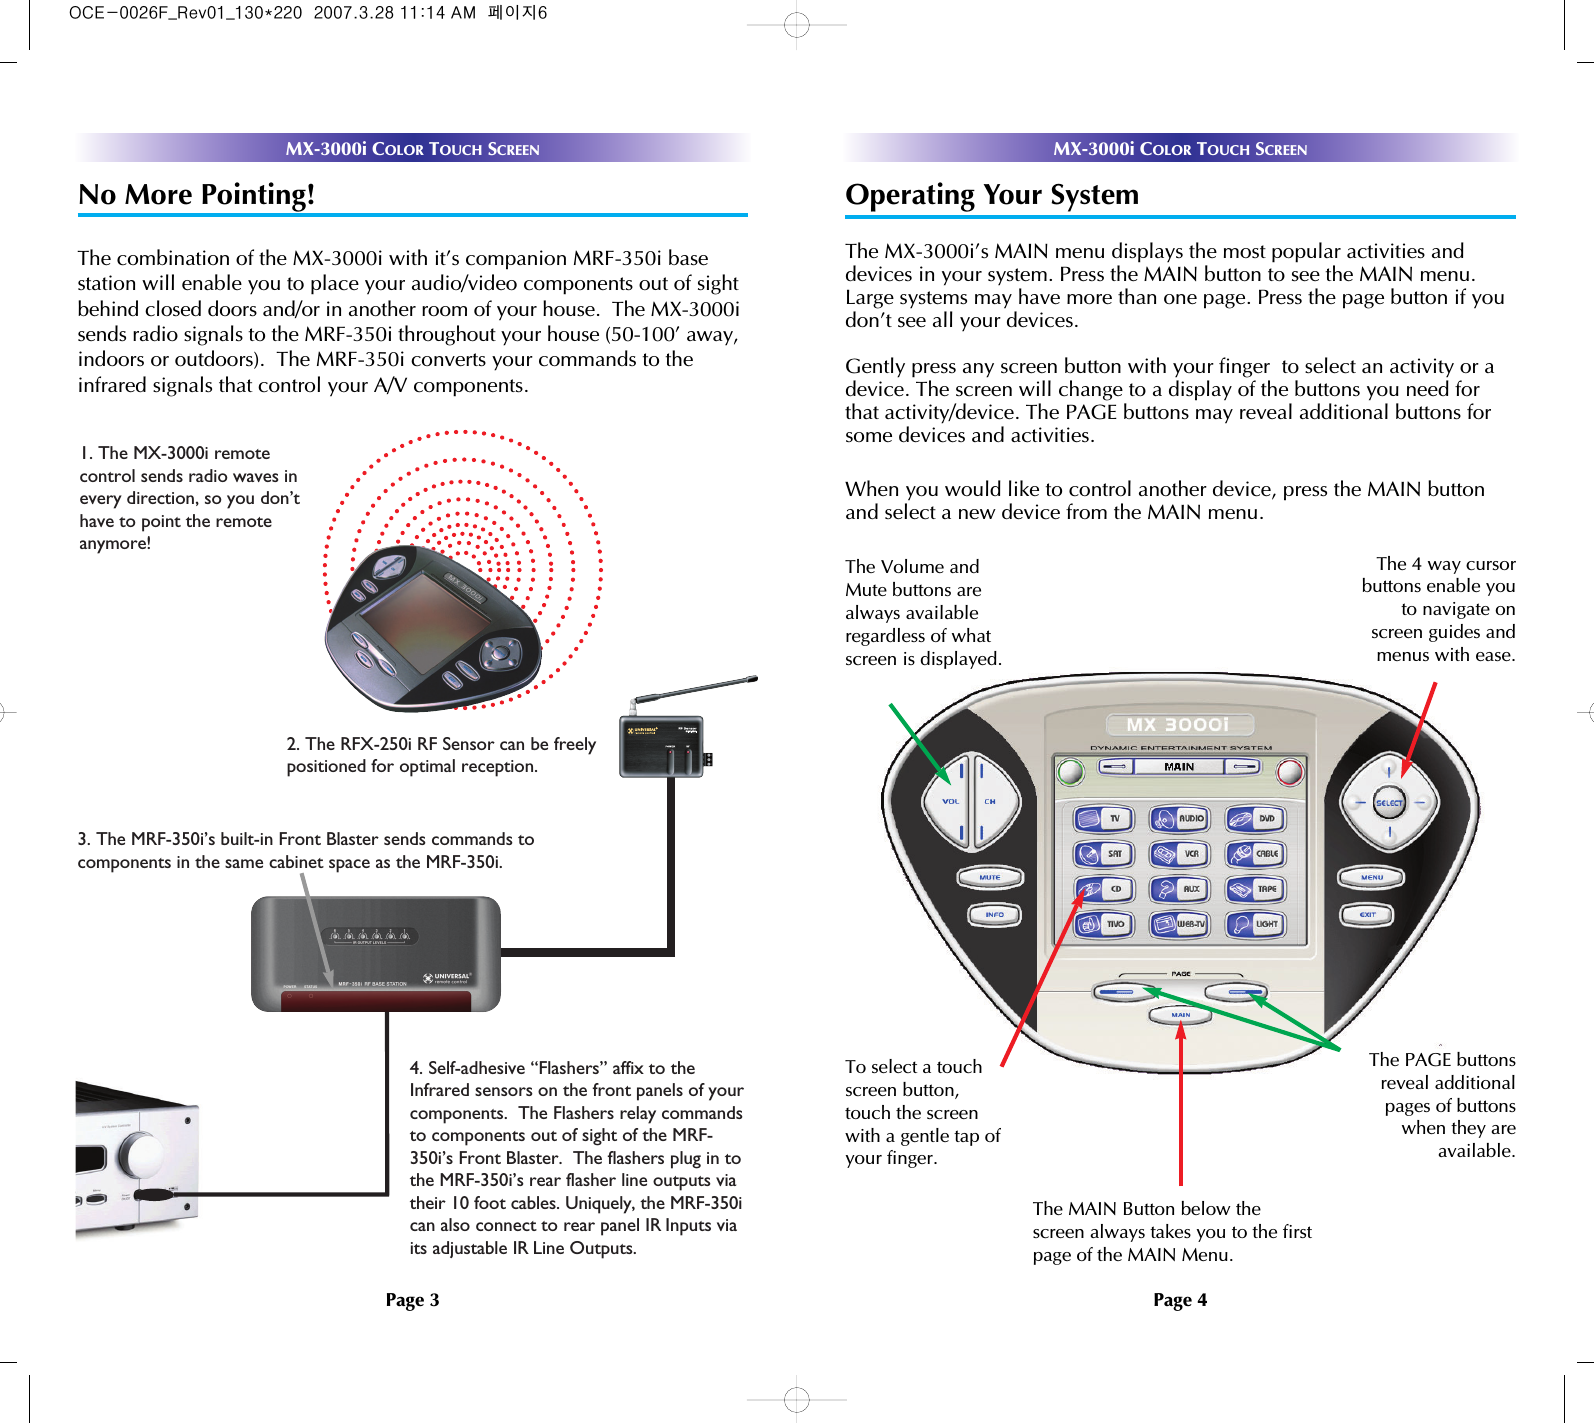 MX-3000i COLOR TOUCH SCREENNo More Pointing!The combination of the MX-3000i with it’s companion MRF-350i base station will enable you to place your audio/video components out of sightbehind closed doors and/or in another room of your house.  The MX-3000isends radio signals to the MRF-350i throughout your house (50-100’ away,indoors or outdoors).  The MRF-350i converts your commands to theinfrared signals that control your A/V components.1. The MX-3000i remote control sends radio waves inevery direction, so you don’thave to point the remote anymore!4. Self-adhesive “Flashers” affix to theInfrared sensors on the front panels of yourcomponents.  The Flashers relay commandsto components out of sight of the MRF-350i’s Front Blaster.  The flashers plug in tothe MRF-350i’s rear flasher line outputs viatheir 10 foot cables. Uniquely, the MRF-350ican also connect to rear panel IR Inputs viaits adjustable IR Line Outputs.3. The MRF-350i’s built-in Front Blaster sends commands tocomponents in the same cabinet space as the MRF-350i.2. The RFX-250i RF Sensor can be freelypositioned for optimal reception.MX-3000i COLOR TOUCH SCREENOperating Your SystemThe MX-3000i’s MAIN menu displays the most popular activities anddevices in your system. Press the MAIN button to see the MAIN menu.Large systems may have more than one page. Press the page button if youdon’t see all your devices. Gently press any screen button with your finger  to select an activity or adevice. The screen will change to a display of the buttons you need forthat activity/device. The PAGE buttons may reveal additional buttons forsome devices and activities.When you would like to control another device, press the MAIN buttonand select a new device from the MAIN menu.The PAGE buttonsreveal additionalpages of buttonswhen they areavailable.The Volume andMute buttons arealways availableregardless of whatscreen is displayed.To select a touchscreen button,touch the screenwith a gentle tap ofyour finger.The 4 way cursorbuttons enable youto navigate onscreen guides andmenus with ease.The MAIN Button below thescreen always takes you to the firstpage of the MAIN Menu.Page 3 Page 4OCE-0026F_Rev01_130*220  2007.3.28 11:14 AM  페이지6